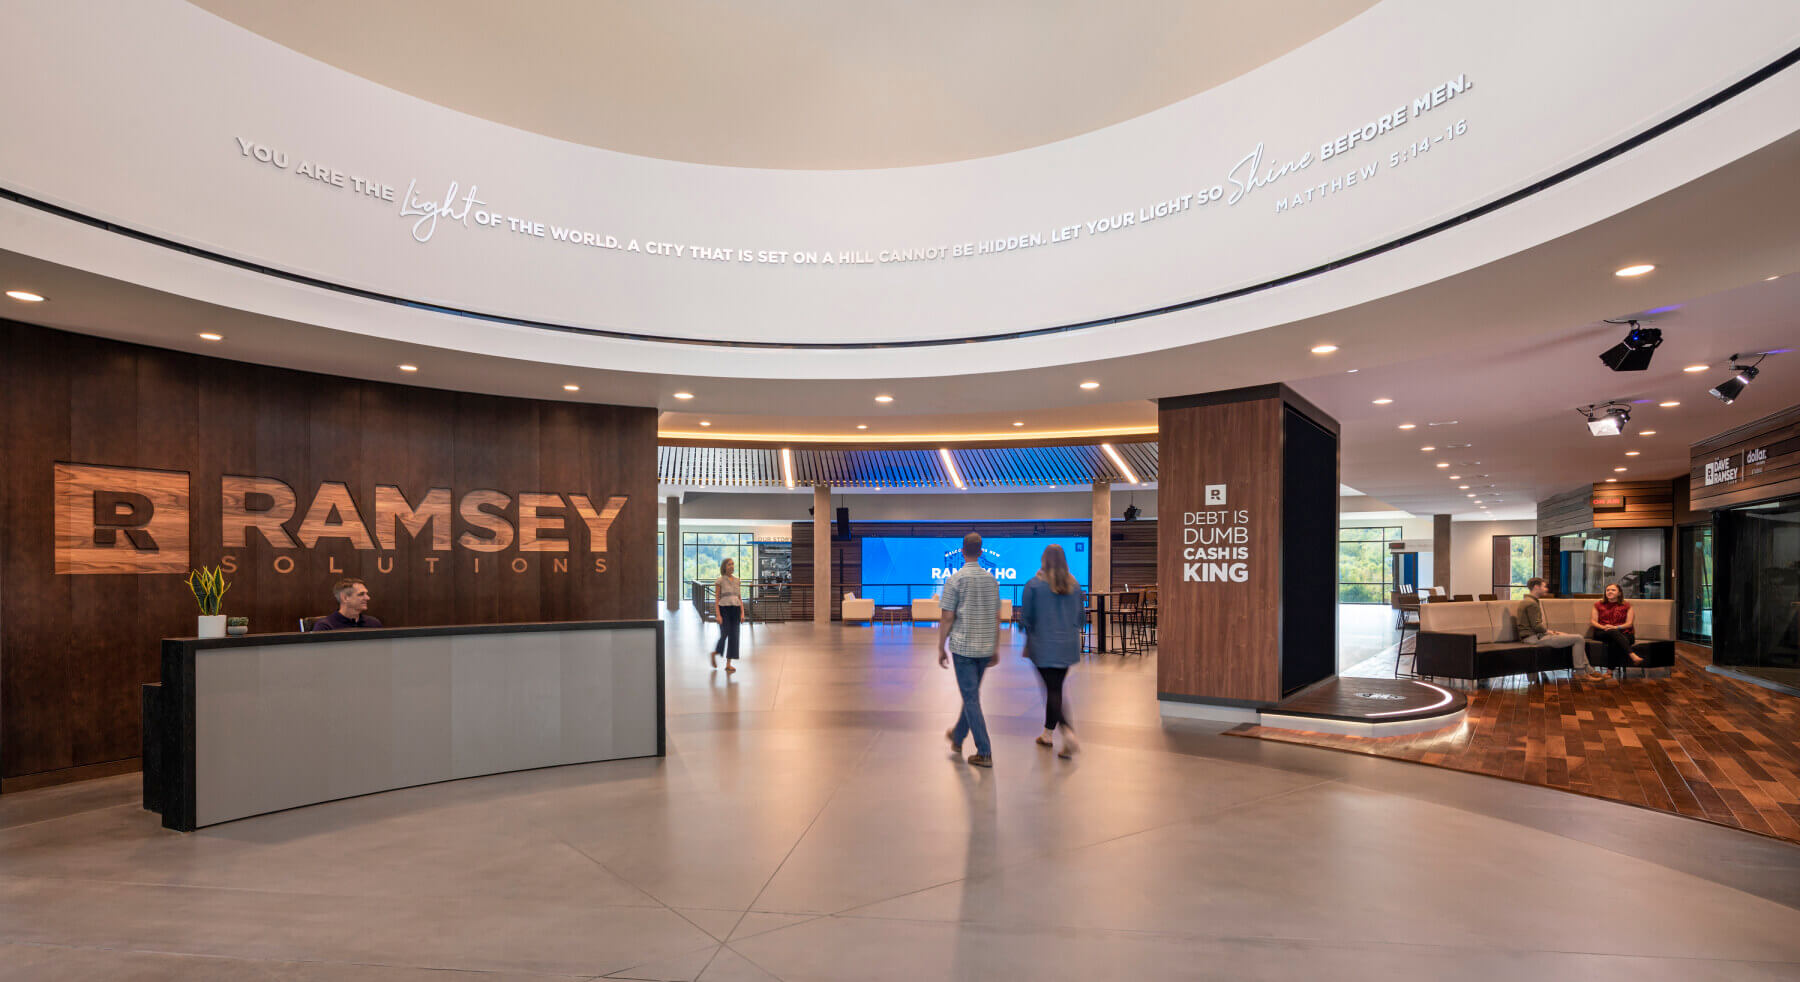 An interior shot of the lobby at the Ramsey Solutions headquarters building